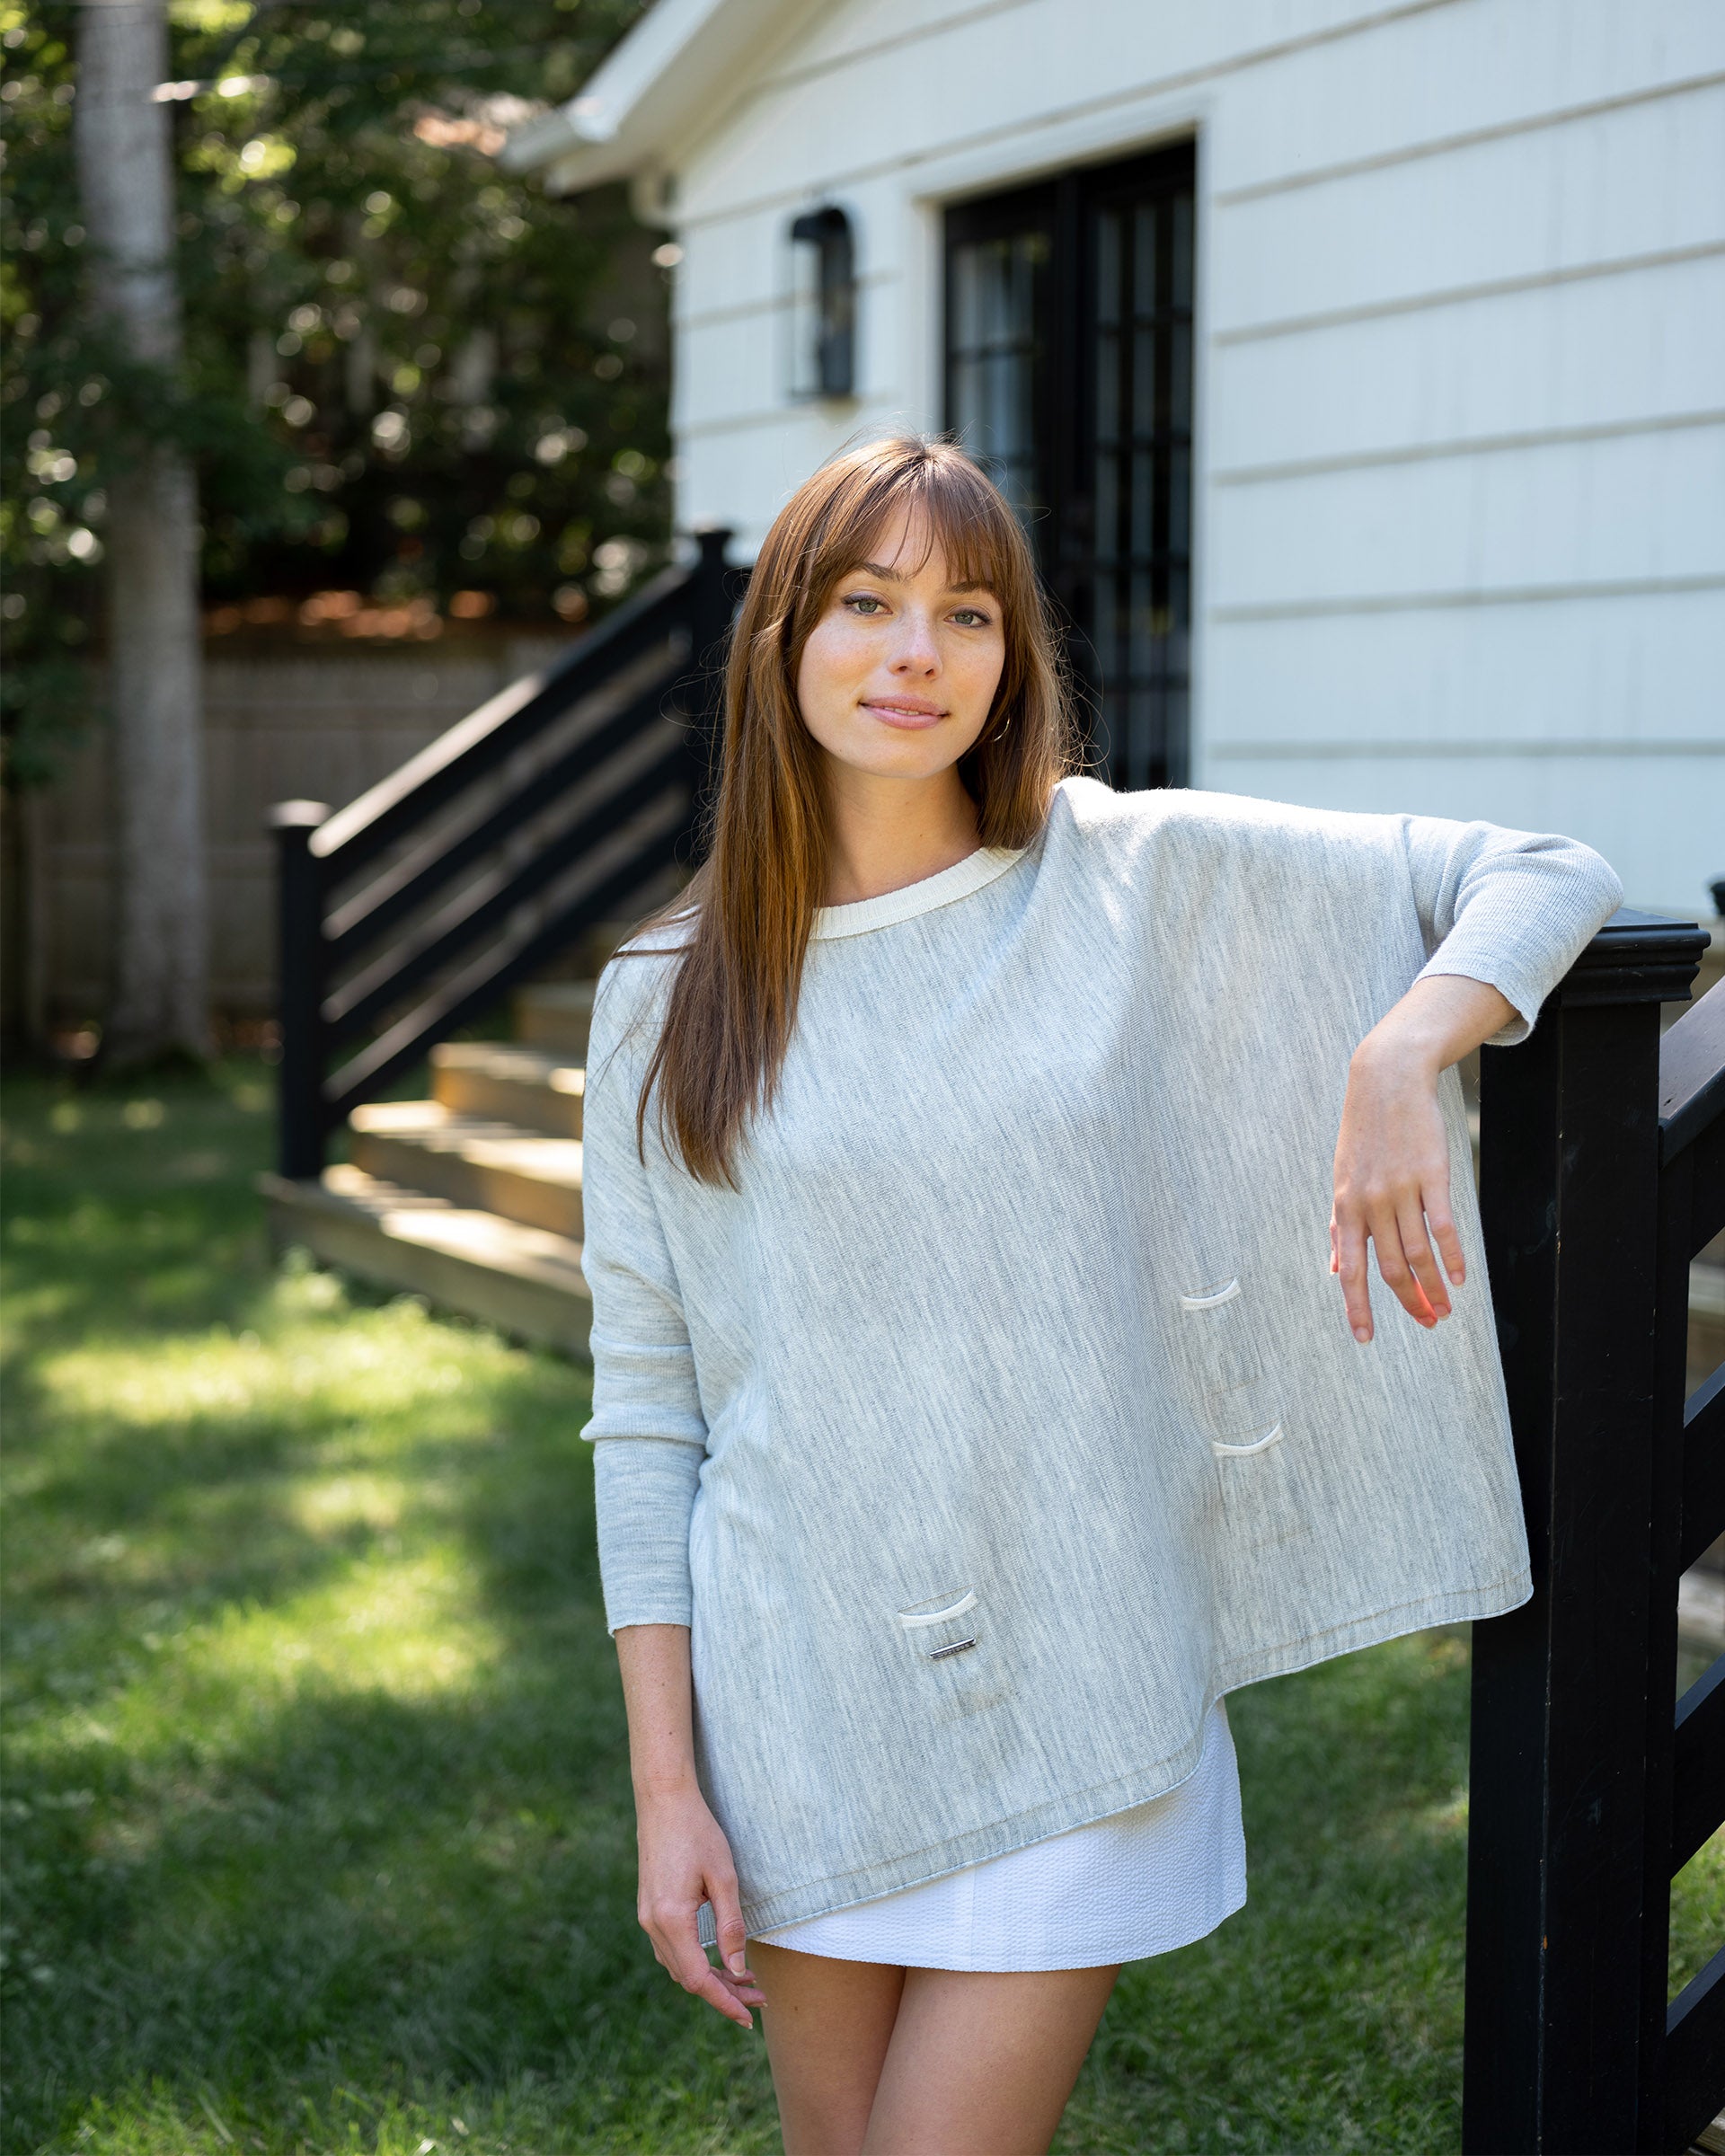 brunette female wearing grey and white sweater standing outside leaning against a railing on a porch